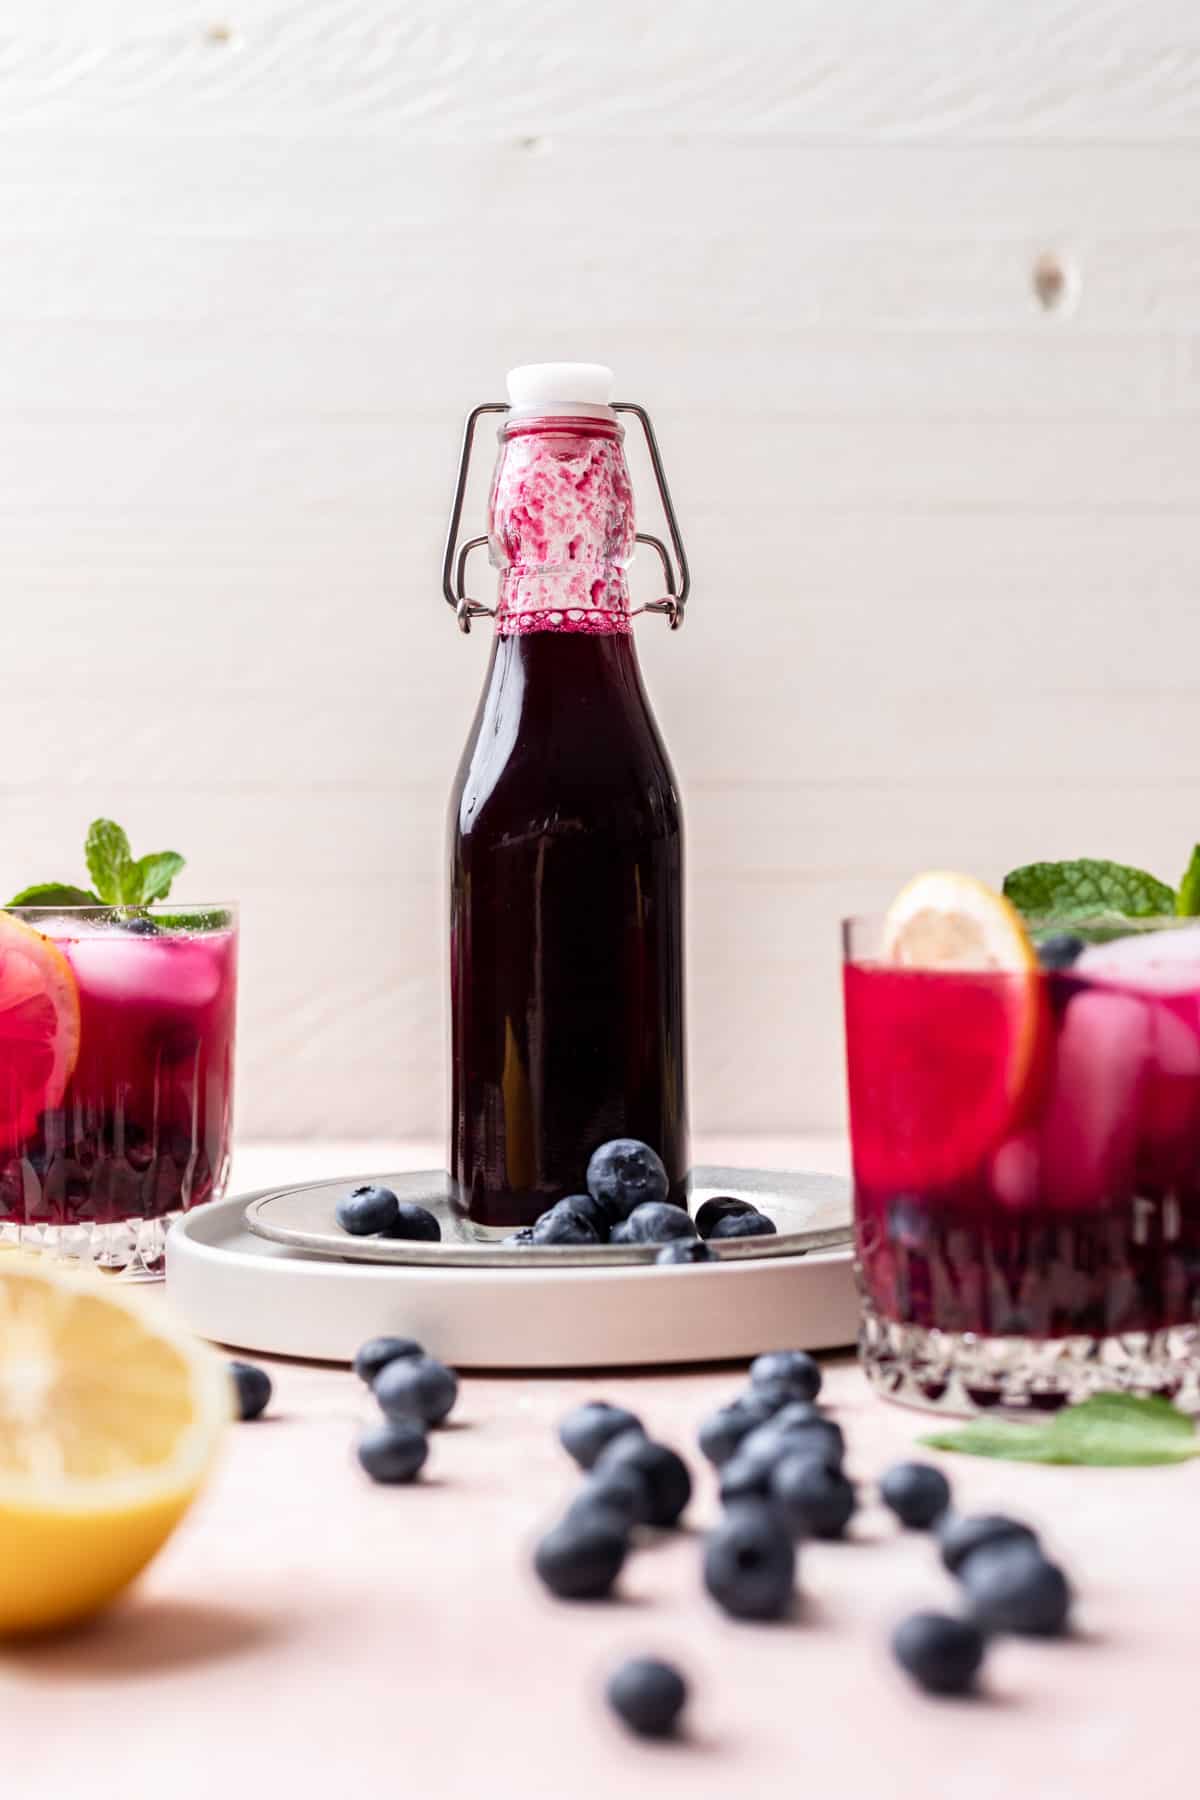 Blueberry simple syrup in a glass bottle with fresh blueberries around it.